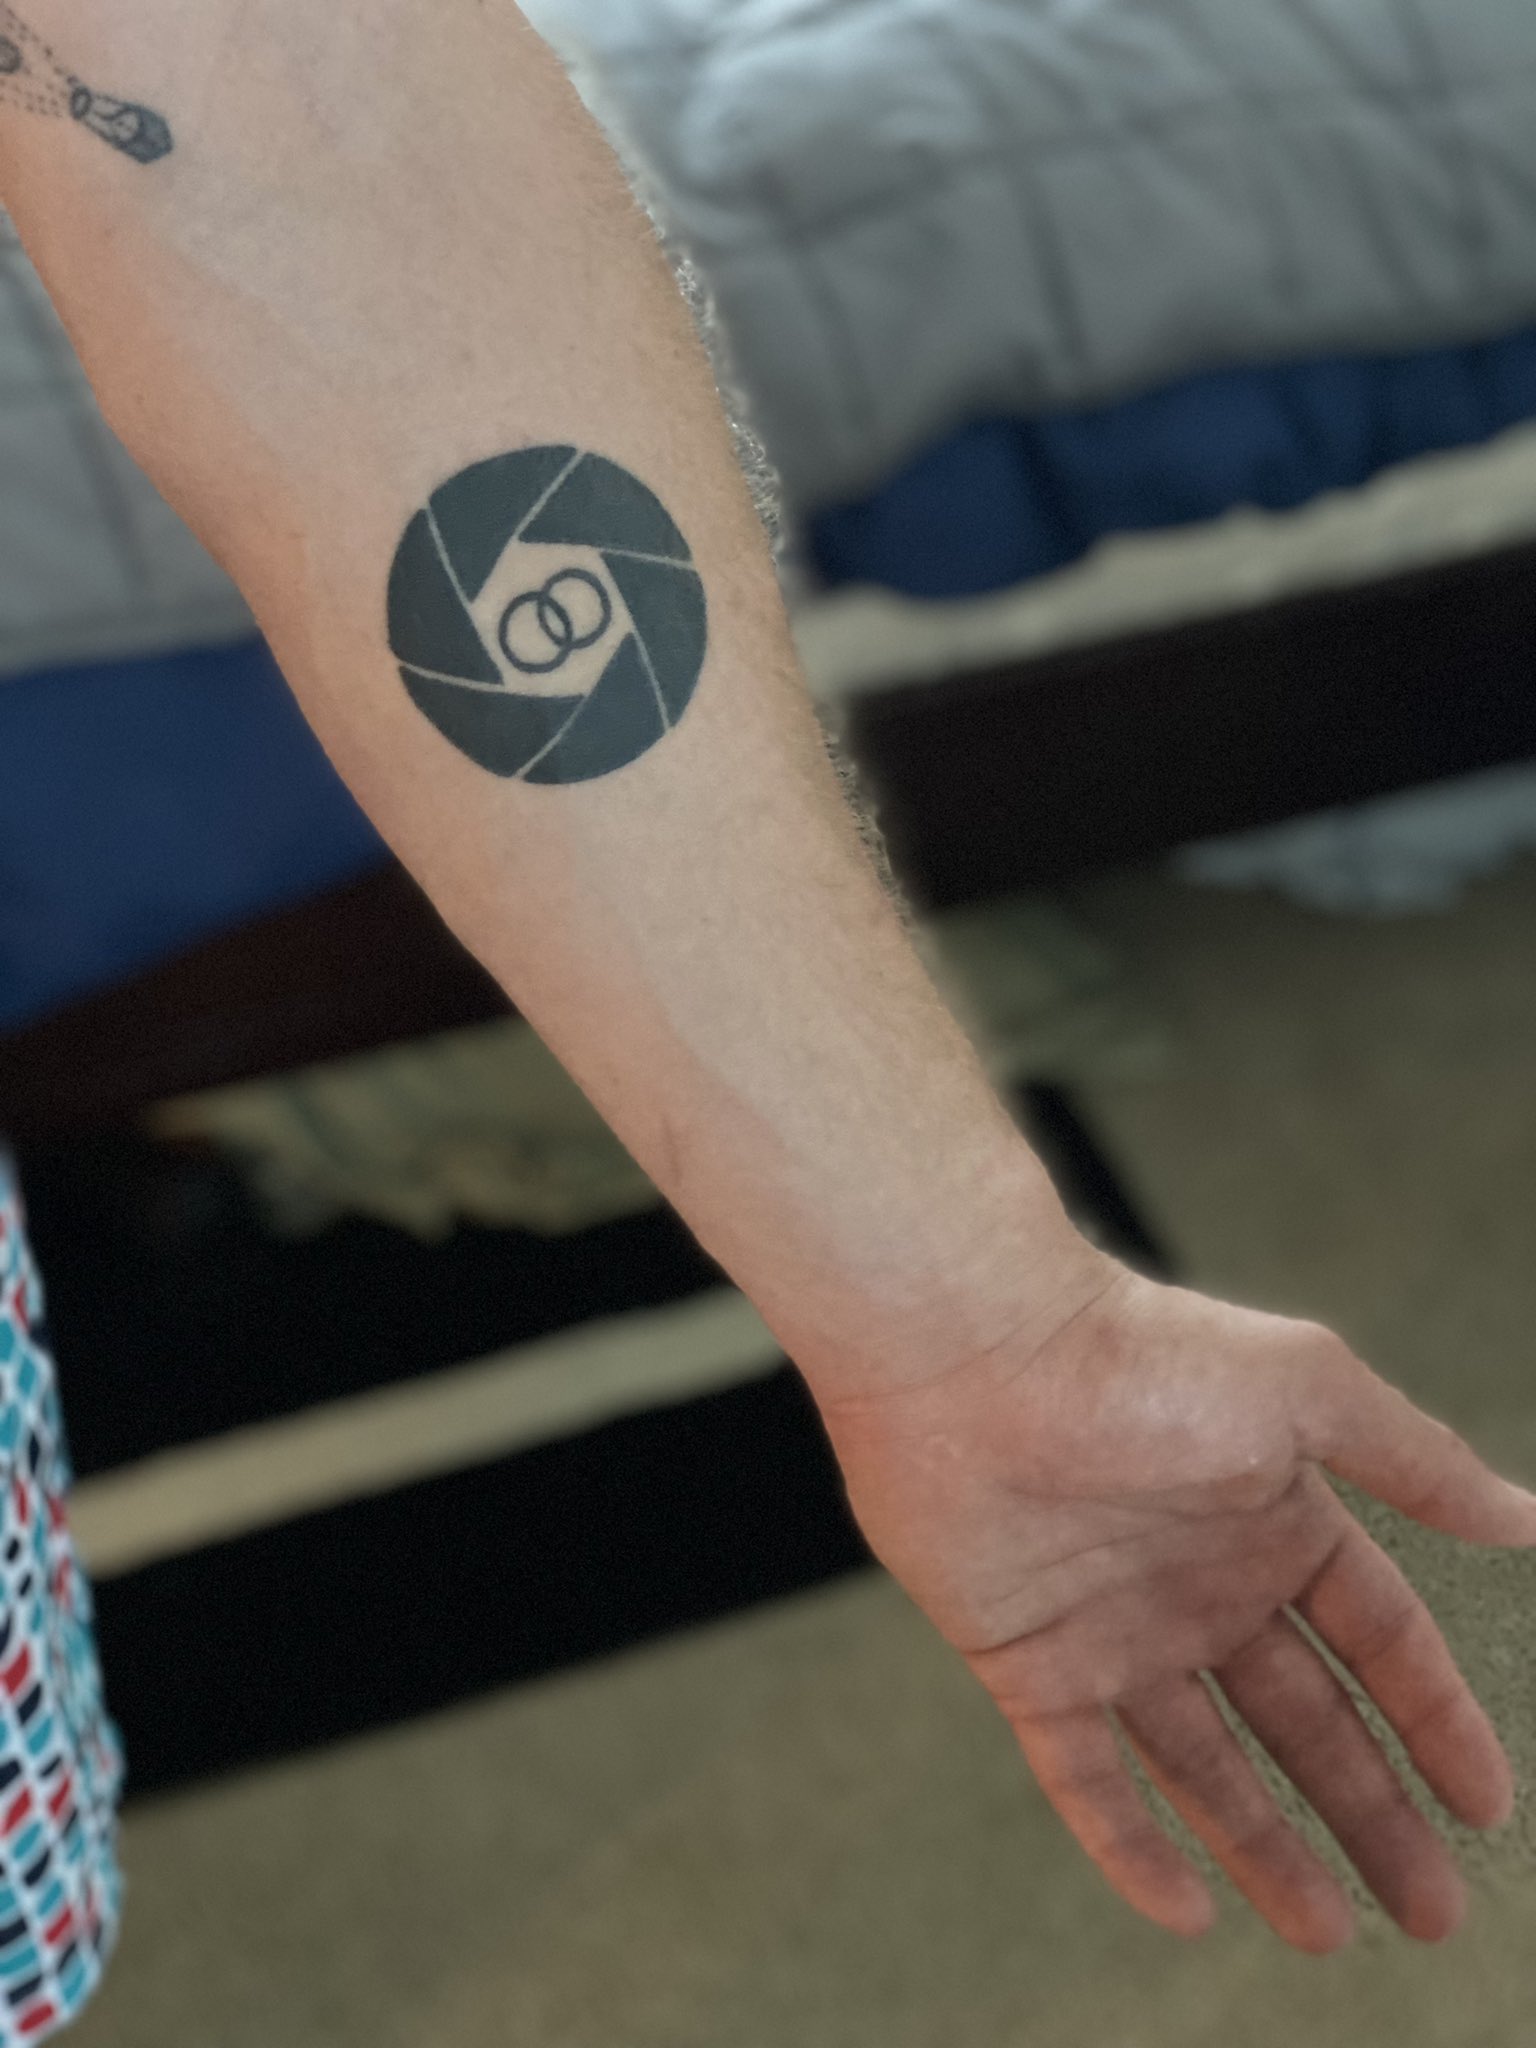 Tattoos related to filmmaking? : r/Filmmakers